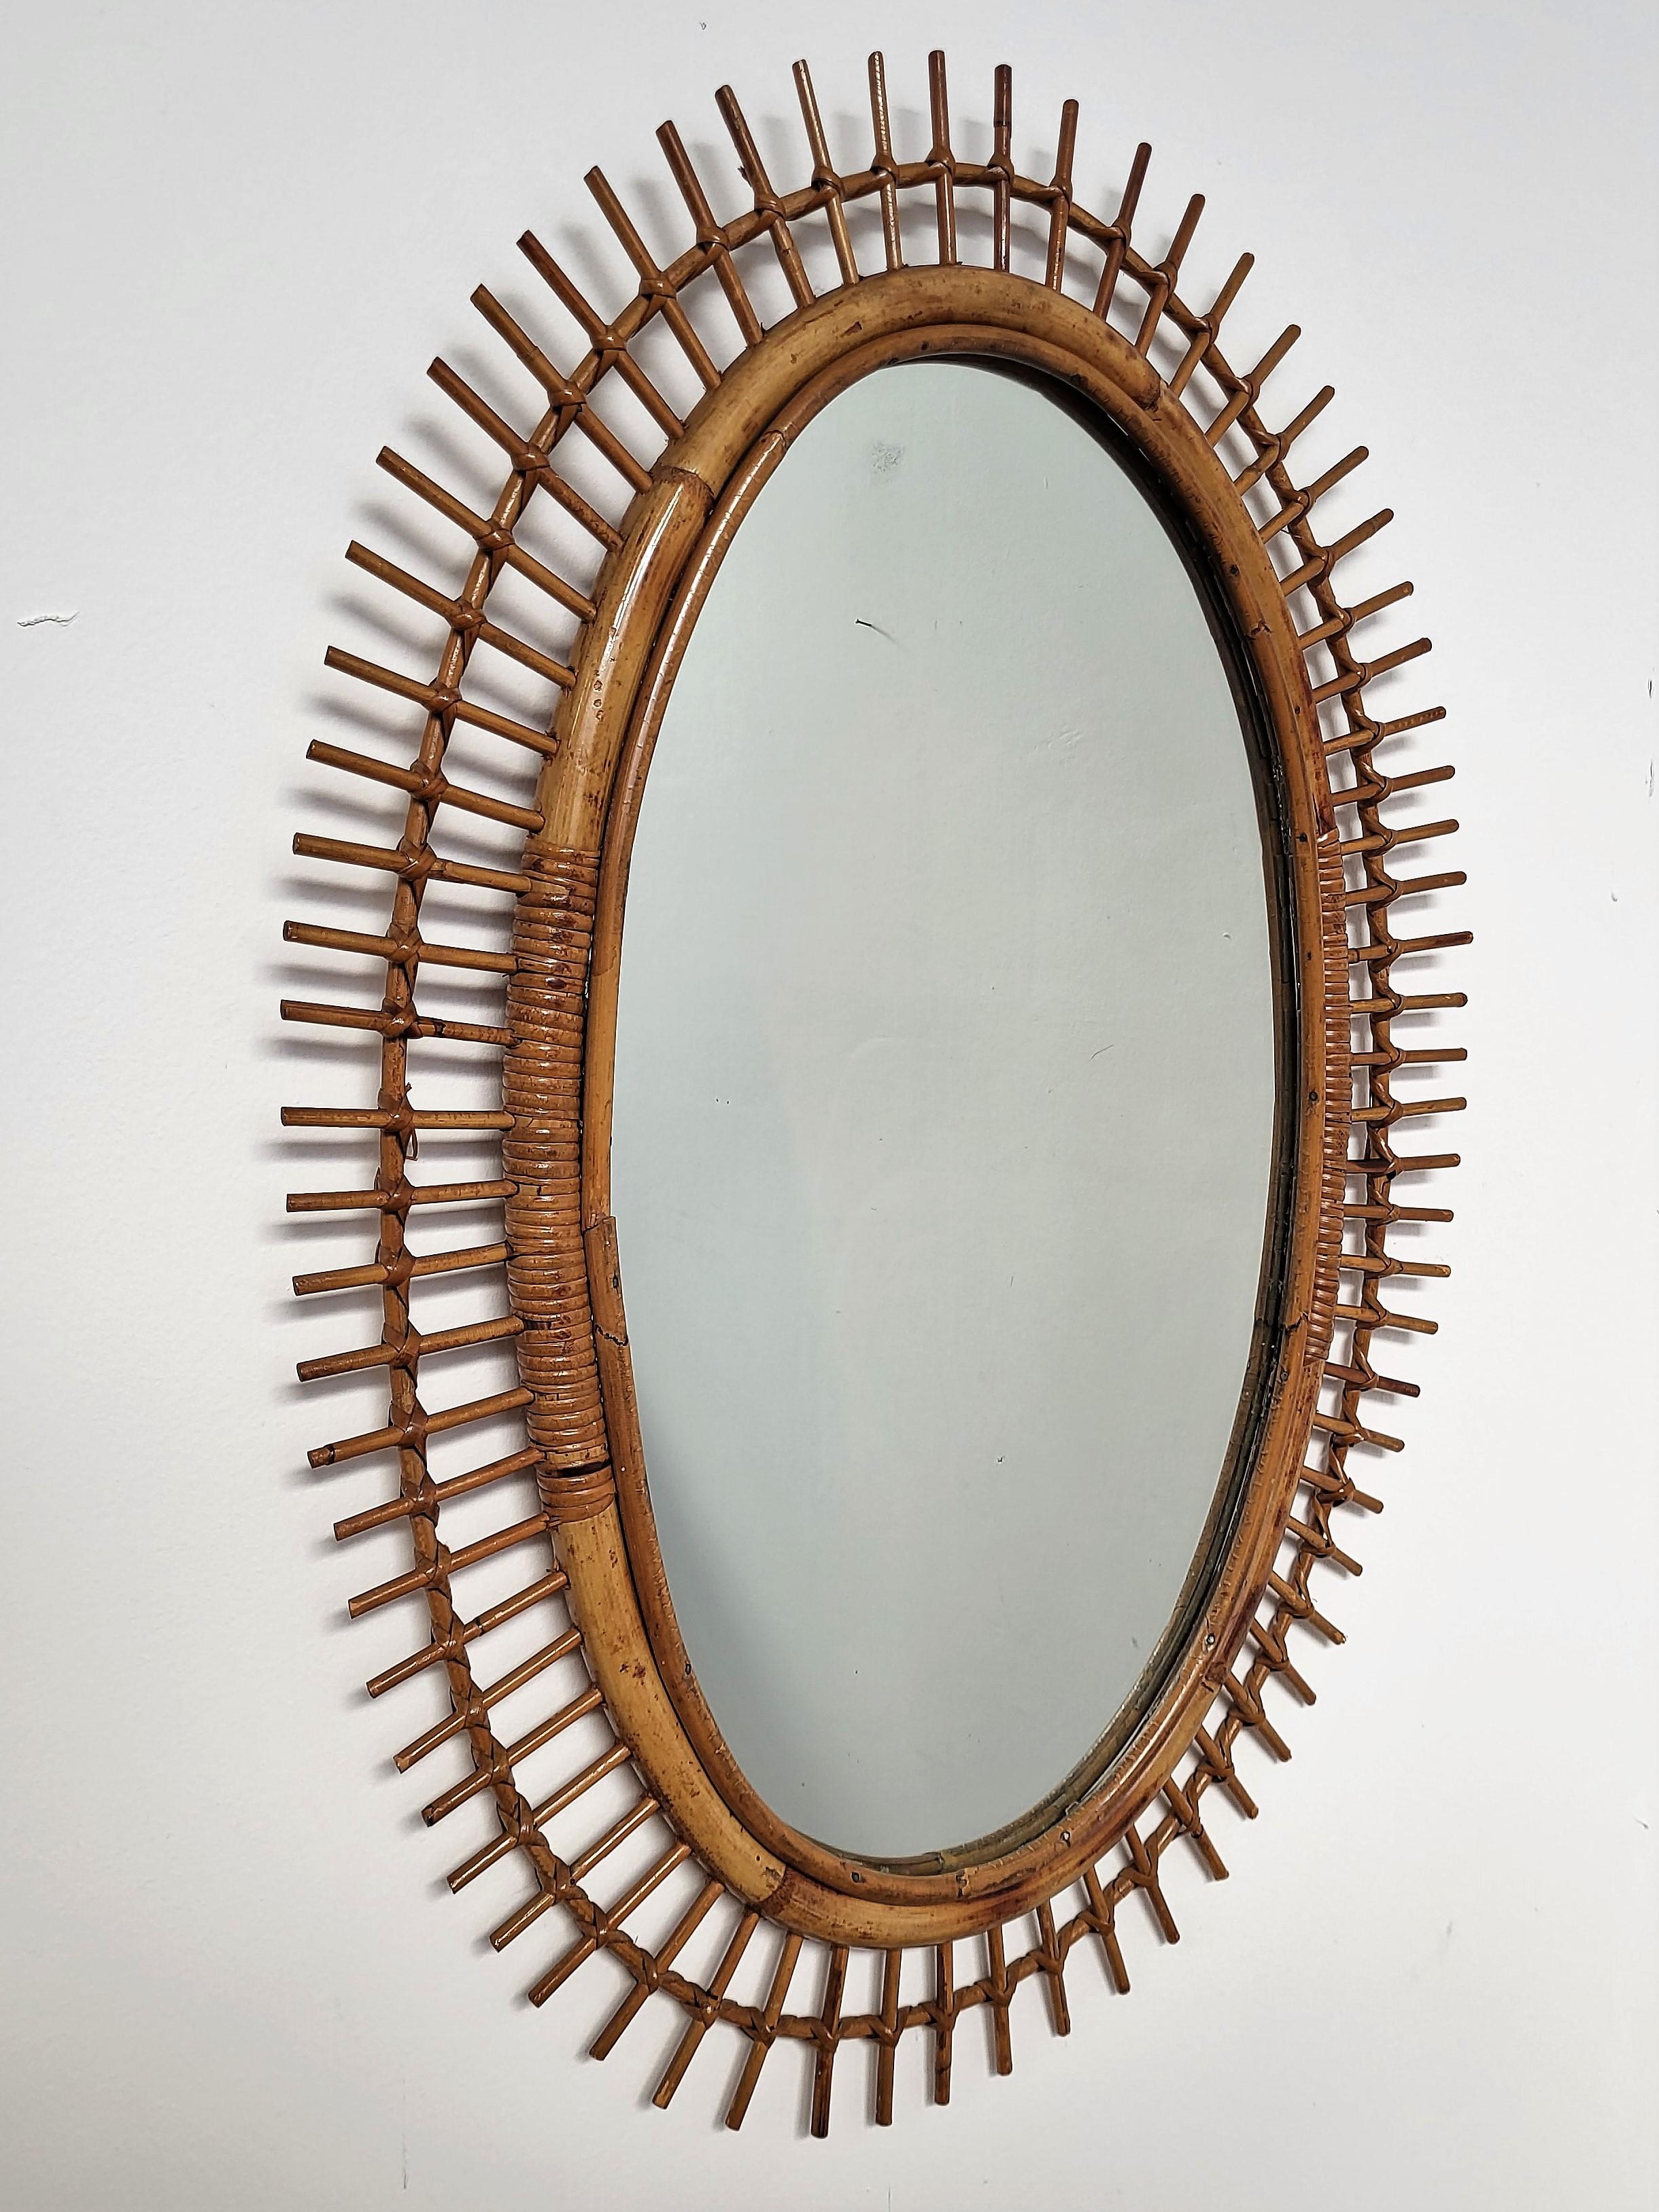 Beautiful 1970s Italian Mid-Century Modern oval shaped wall mirror made of rattan and bamboo. This charming piece is in the typical style of Franco Albini, Adrien Audoux and Vittorio Bonacina where the organic beauty of the woven materials is